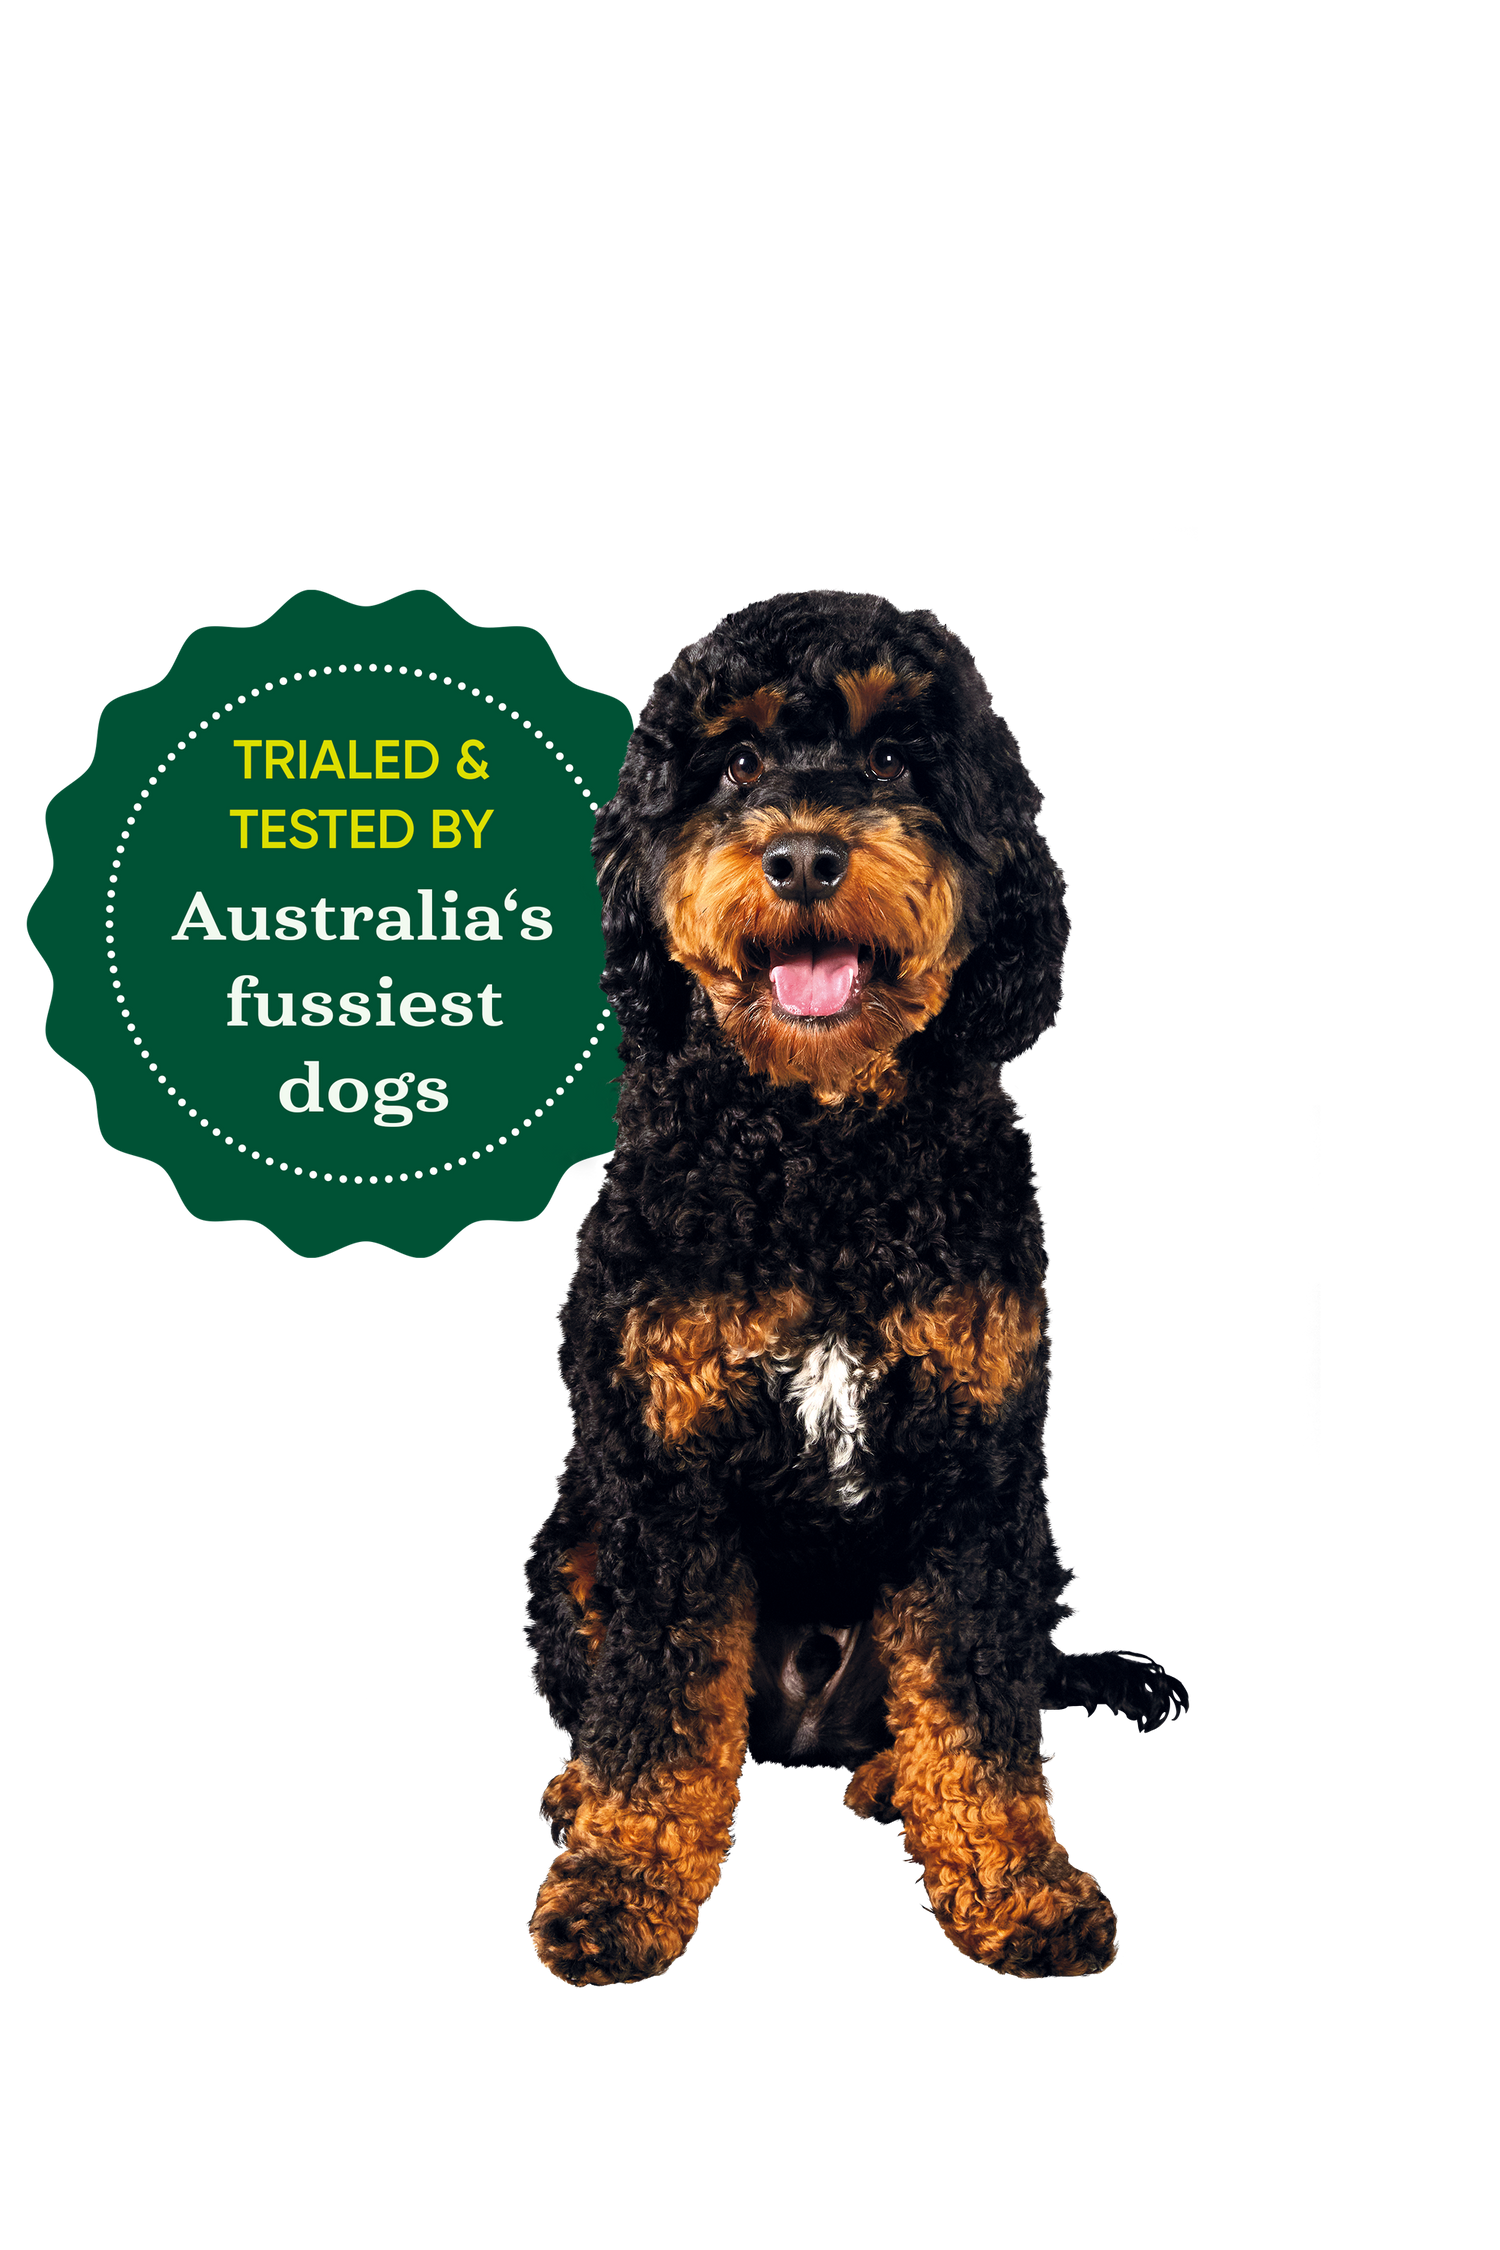 Dog with a badge that reads 'Trialed & Tested by Australia's fussiest dogs'